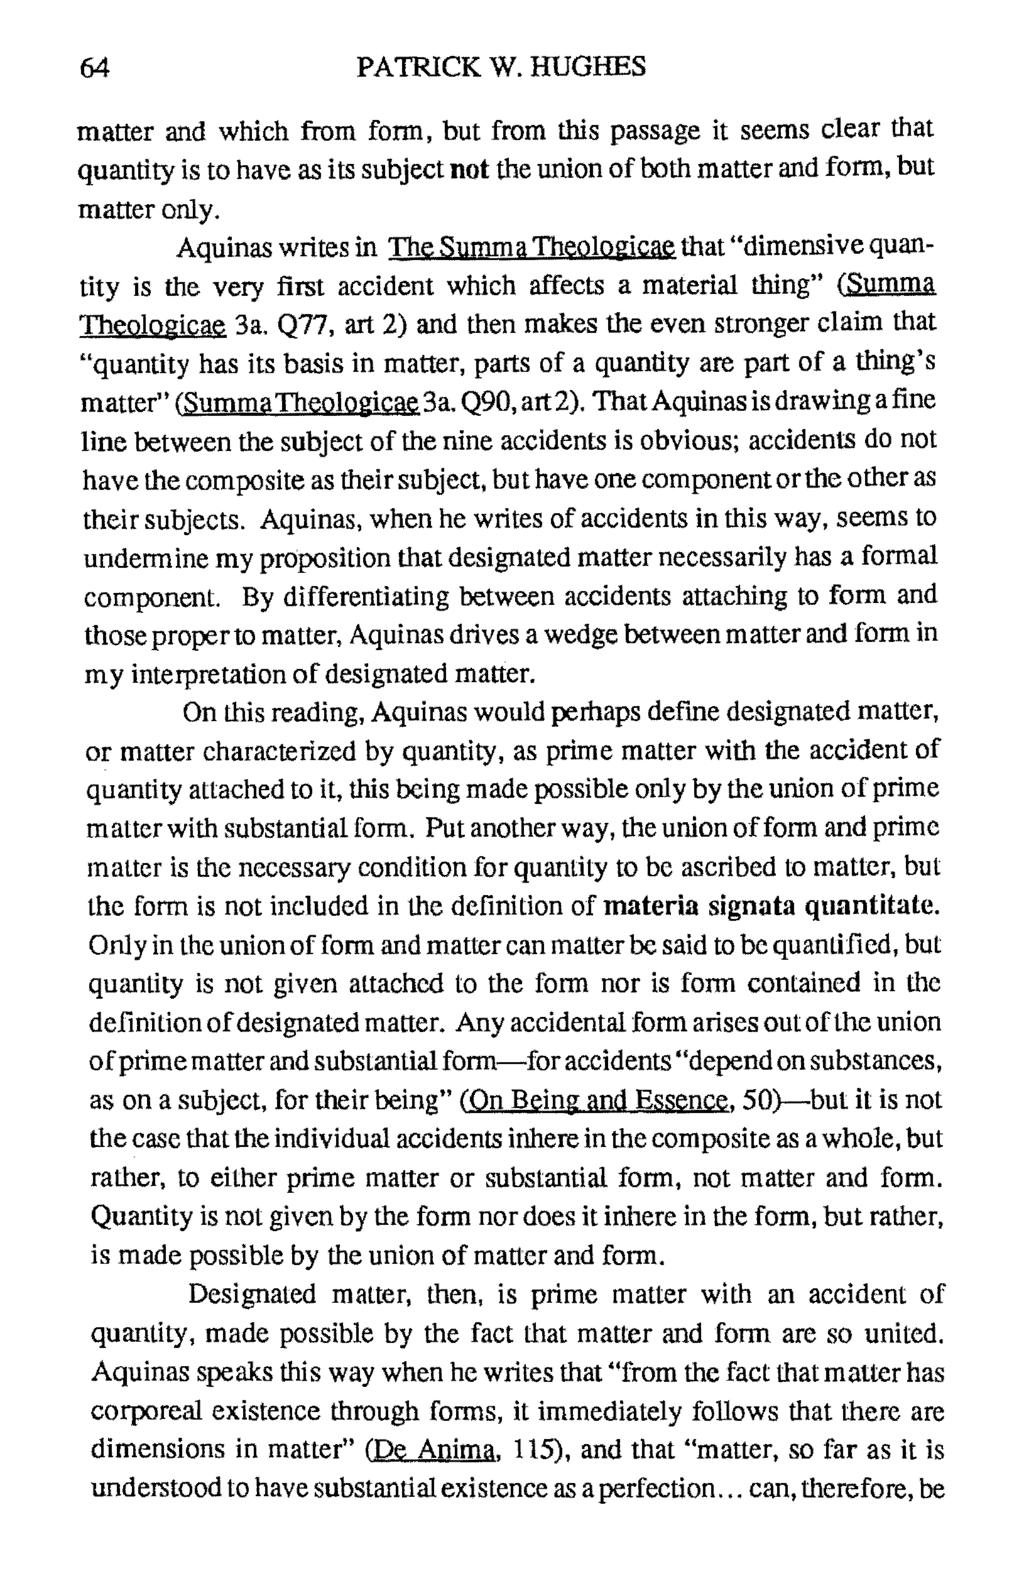 64 PATRCK W. HUGHES matter and which from fonn, but from this passage it seems clear that quantity is to have as its subject not the union of both matter and fonn, but matter only.